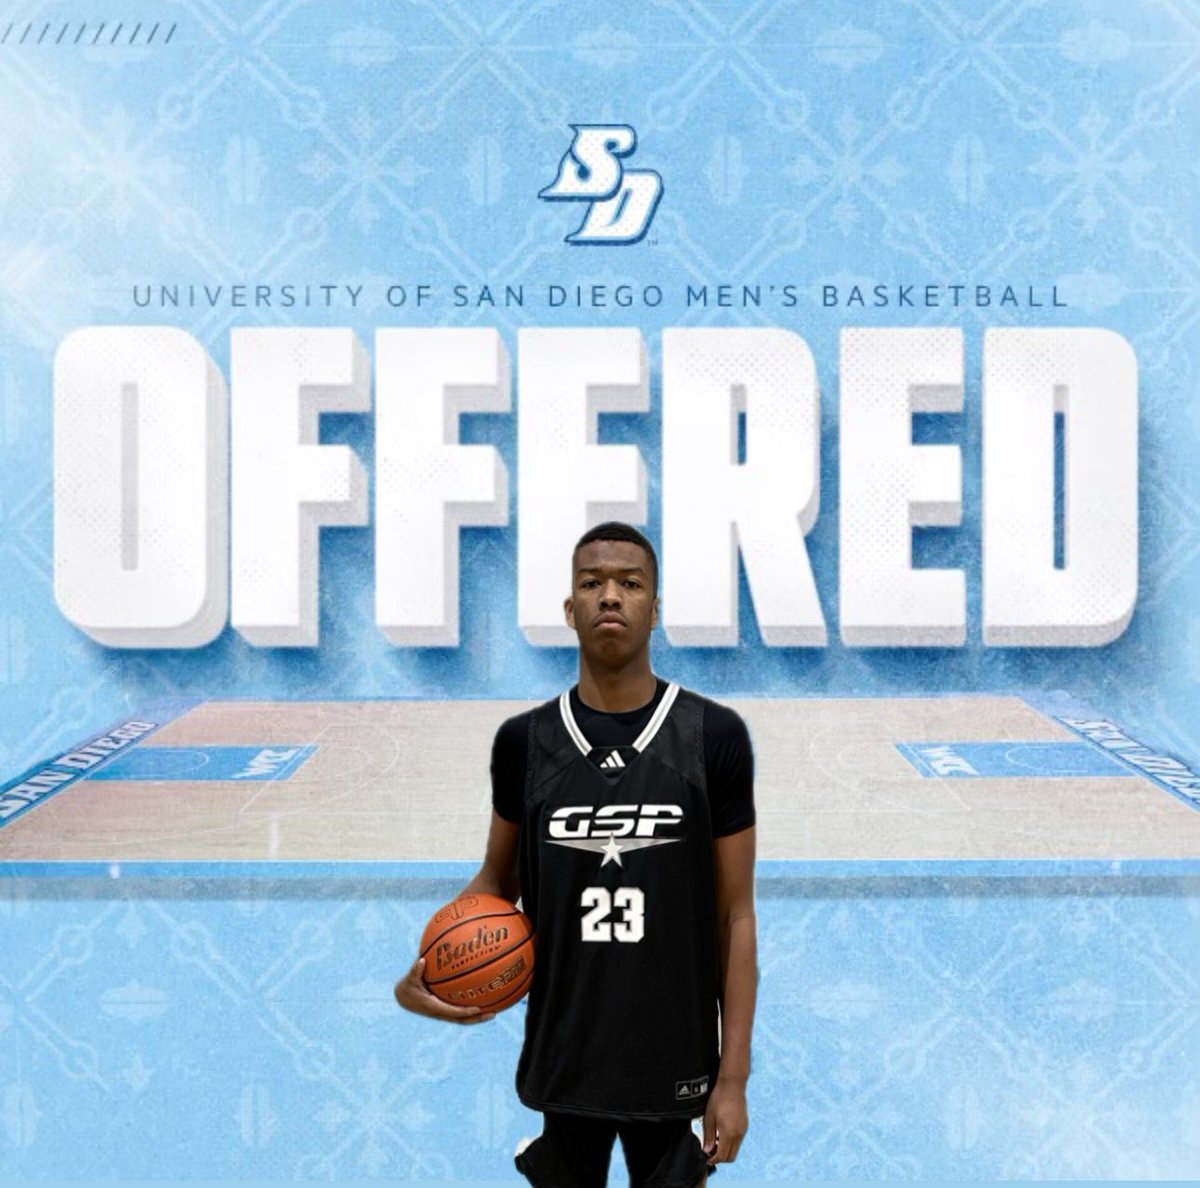 6’11 Kean Webb has just been offered by University of San Diego @usdmbb